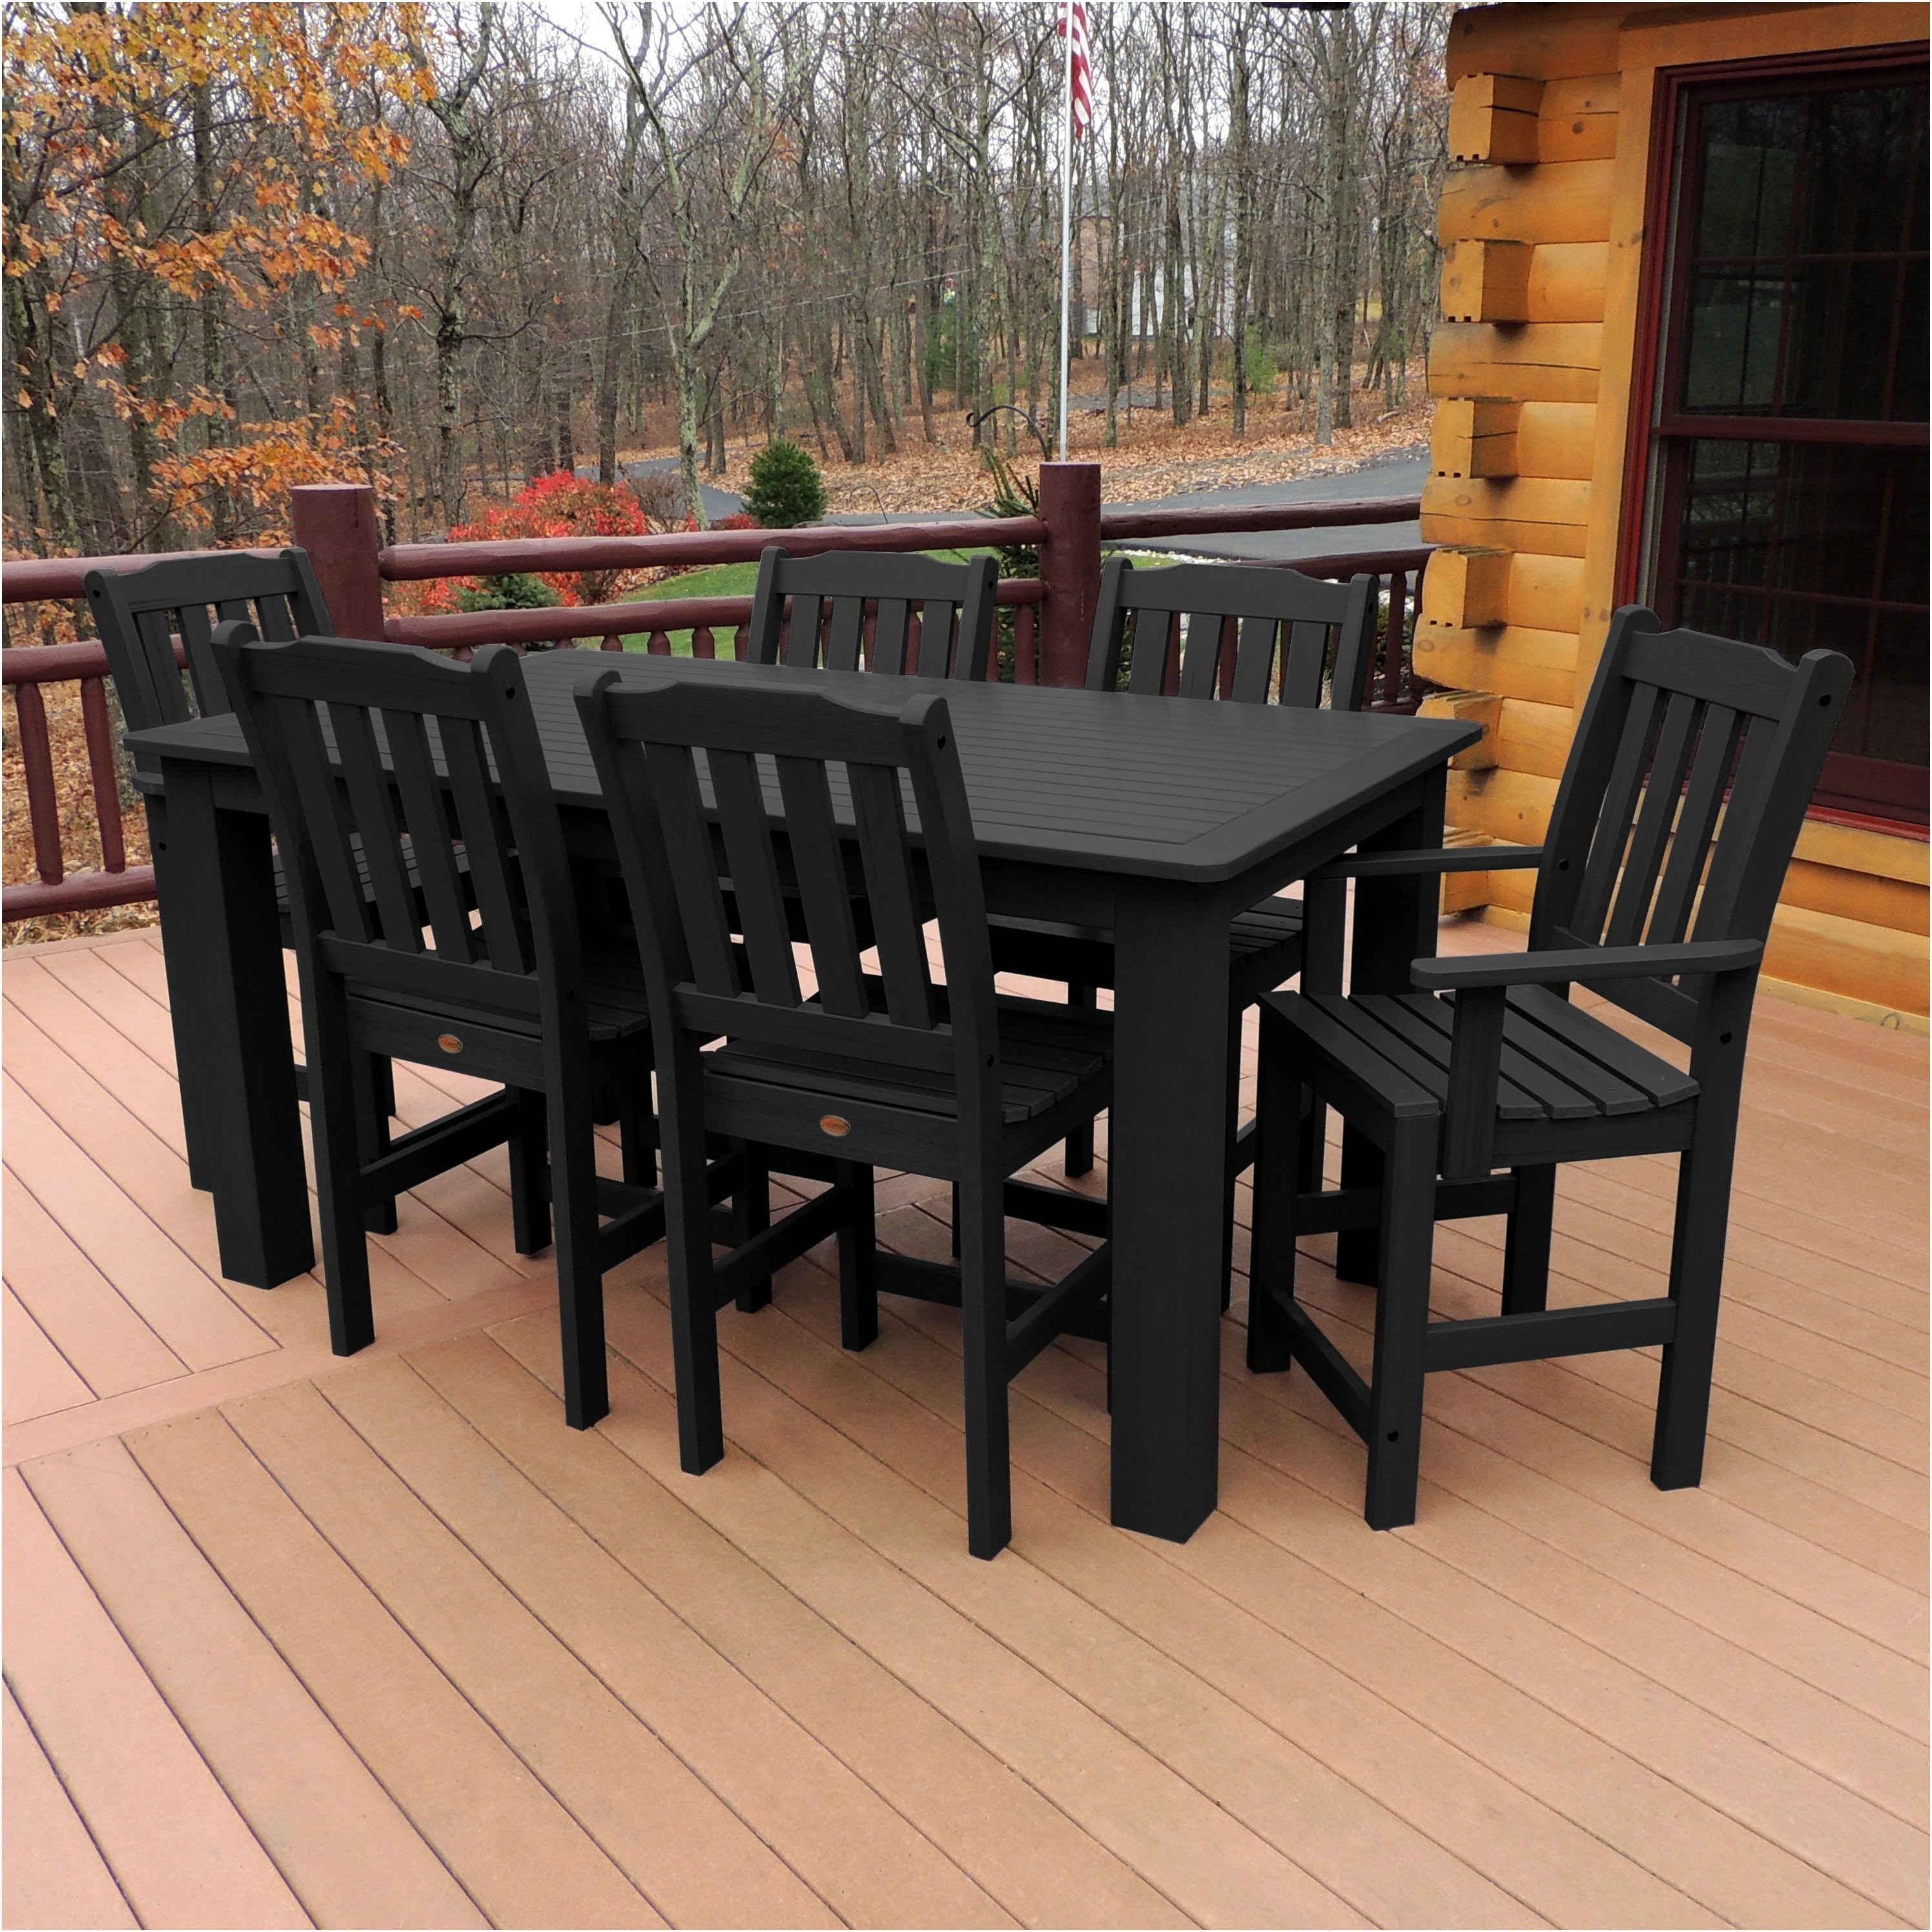 15 Great Lowes Hardwood Floor Stain 2024 free download lowes hardwood floor stain of lowes outdoor furniture sale lovely paints spray paints primers in lowes outdoor furniture sale awesome home design outdoor curtains lowes best deep kitchen cab